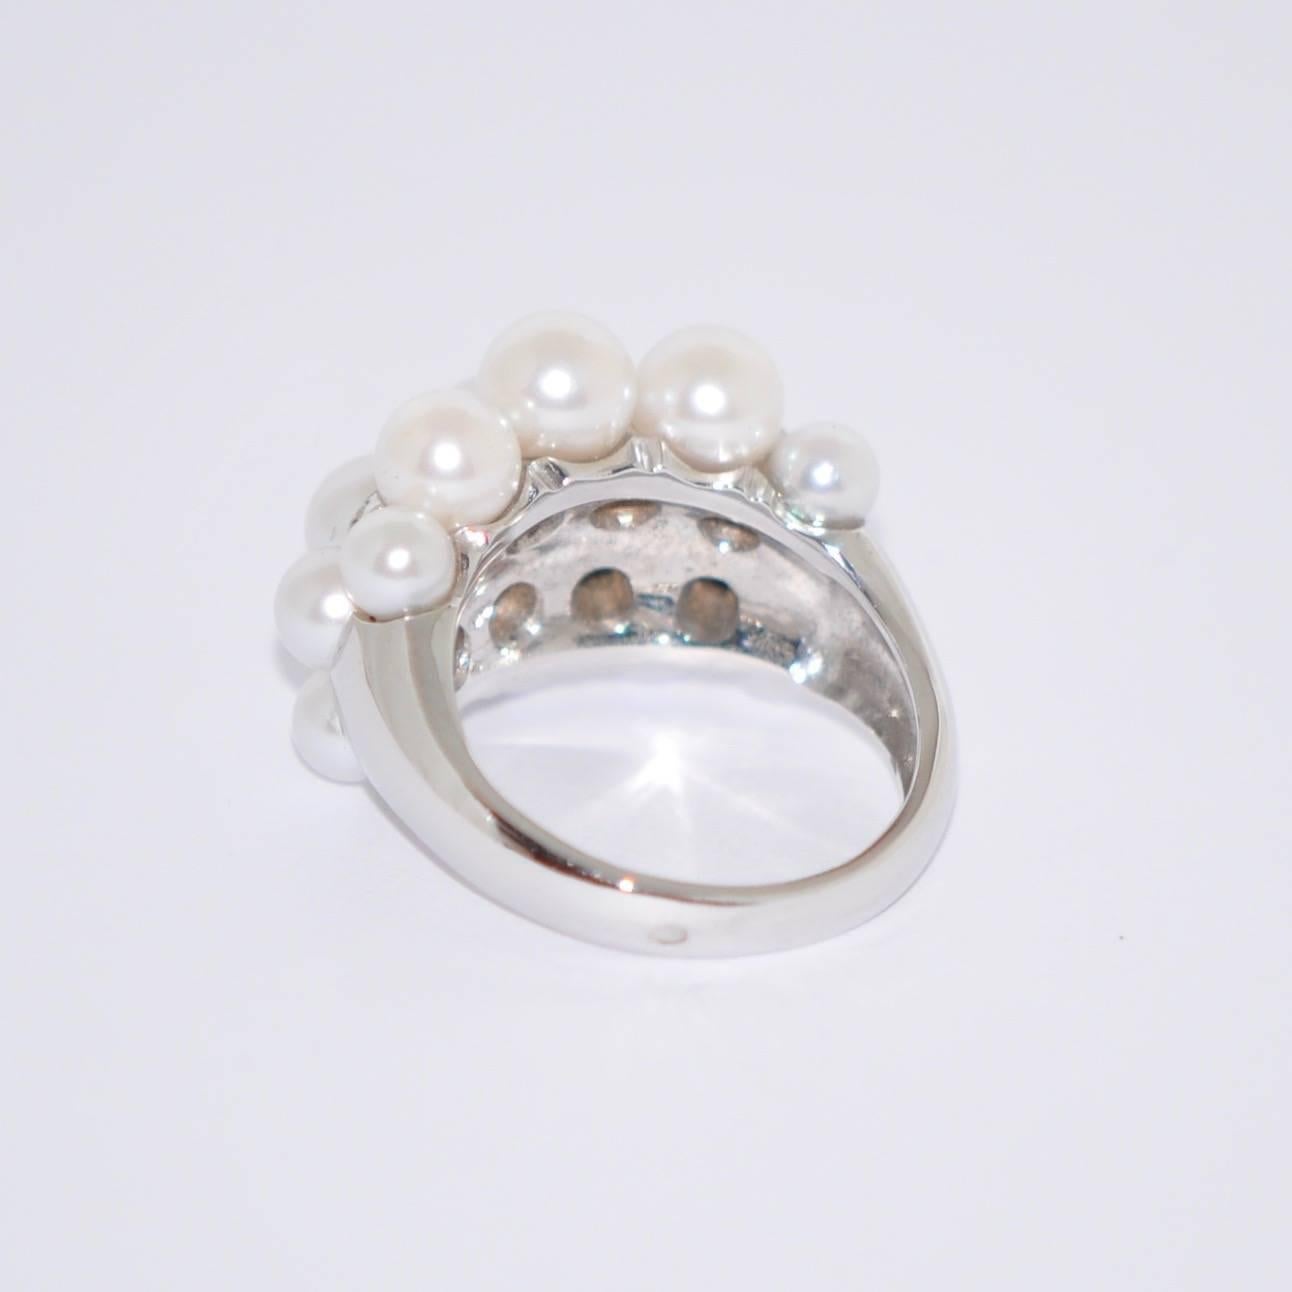 Akoya Cultured Pearls and White Diamonds on White Gold 18 Karat Dome Ring 1